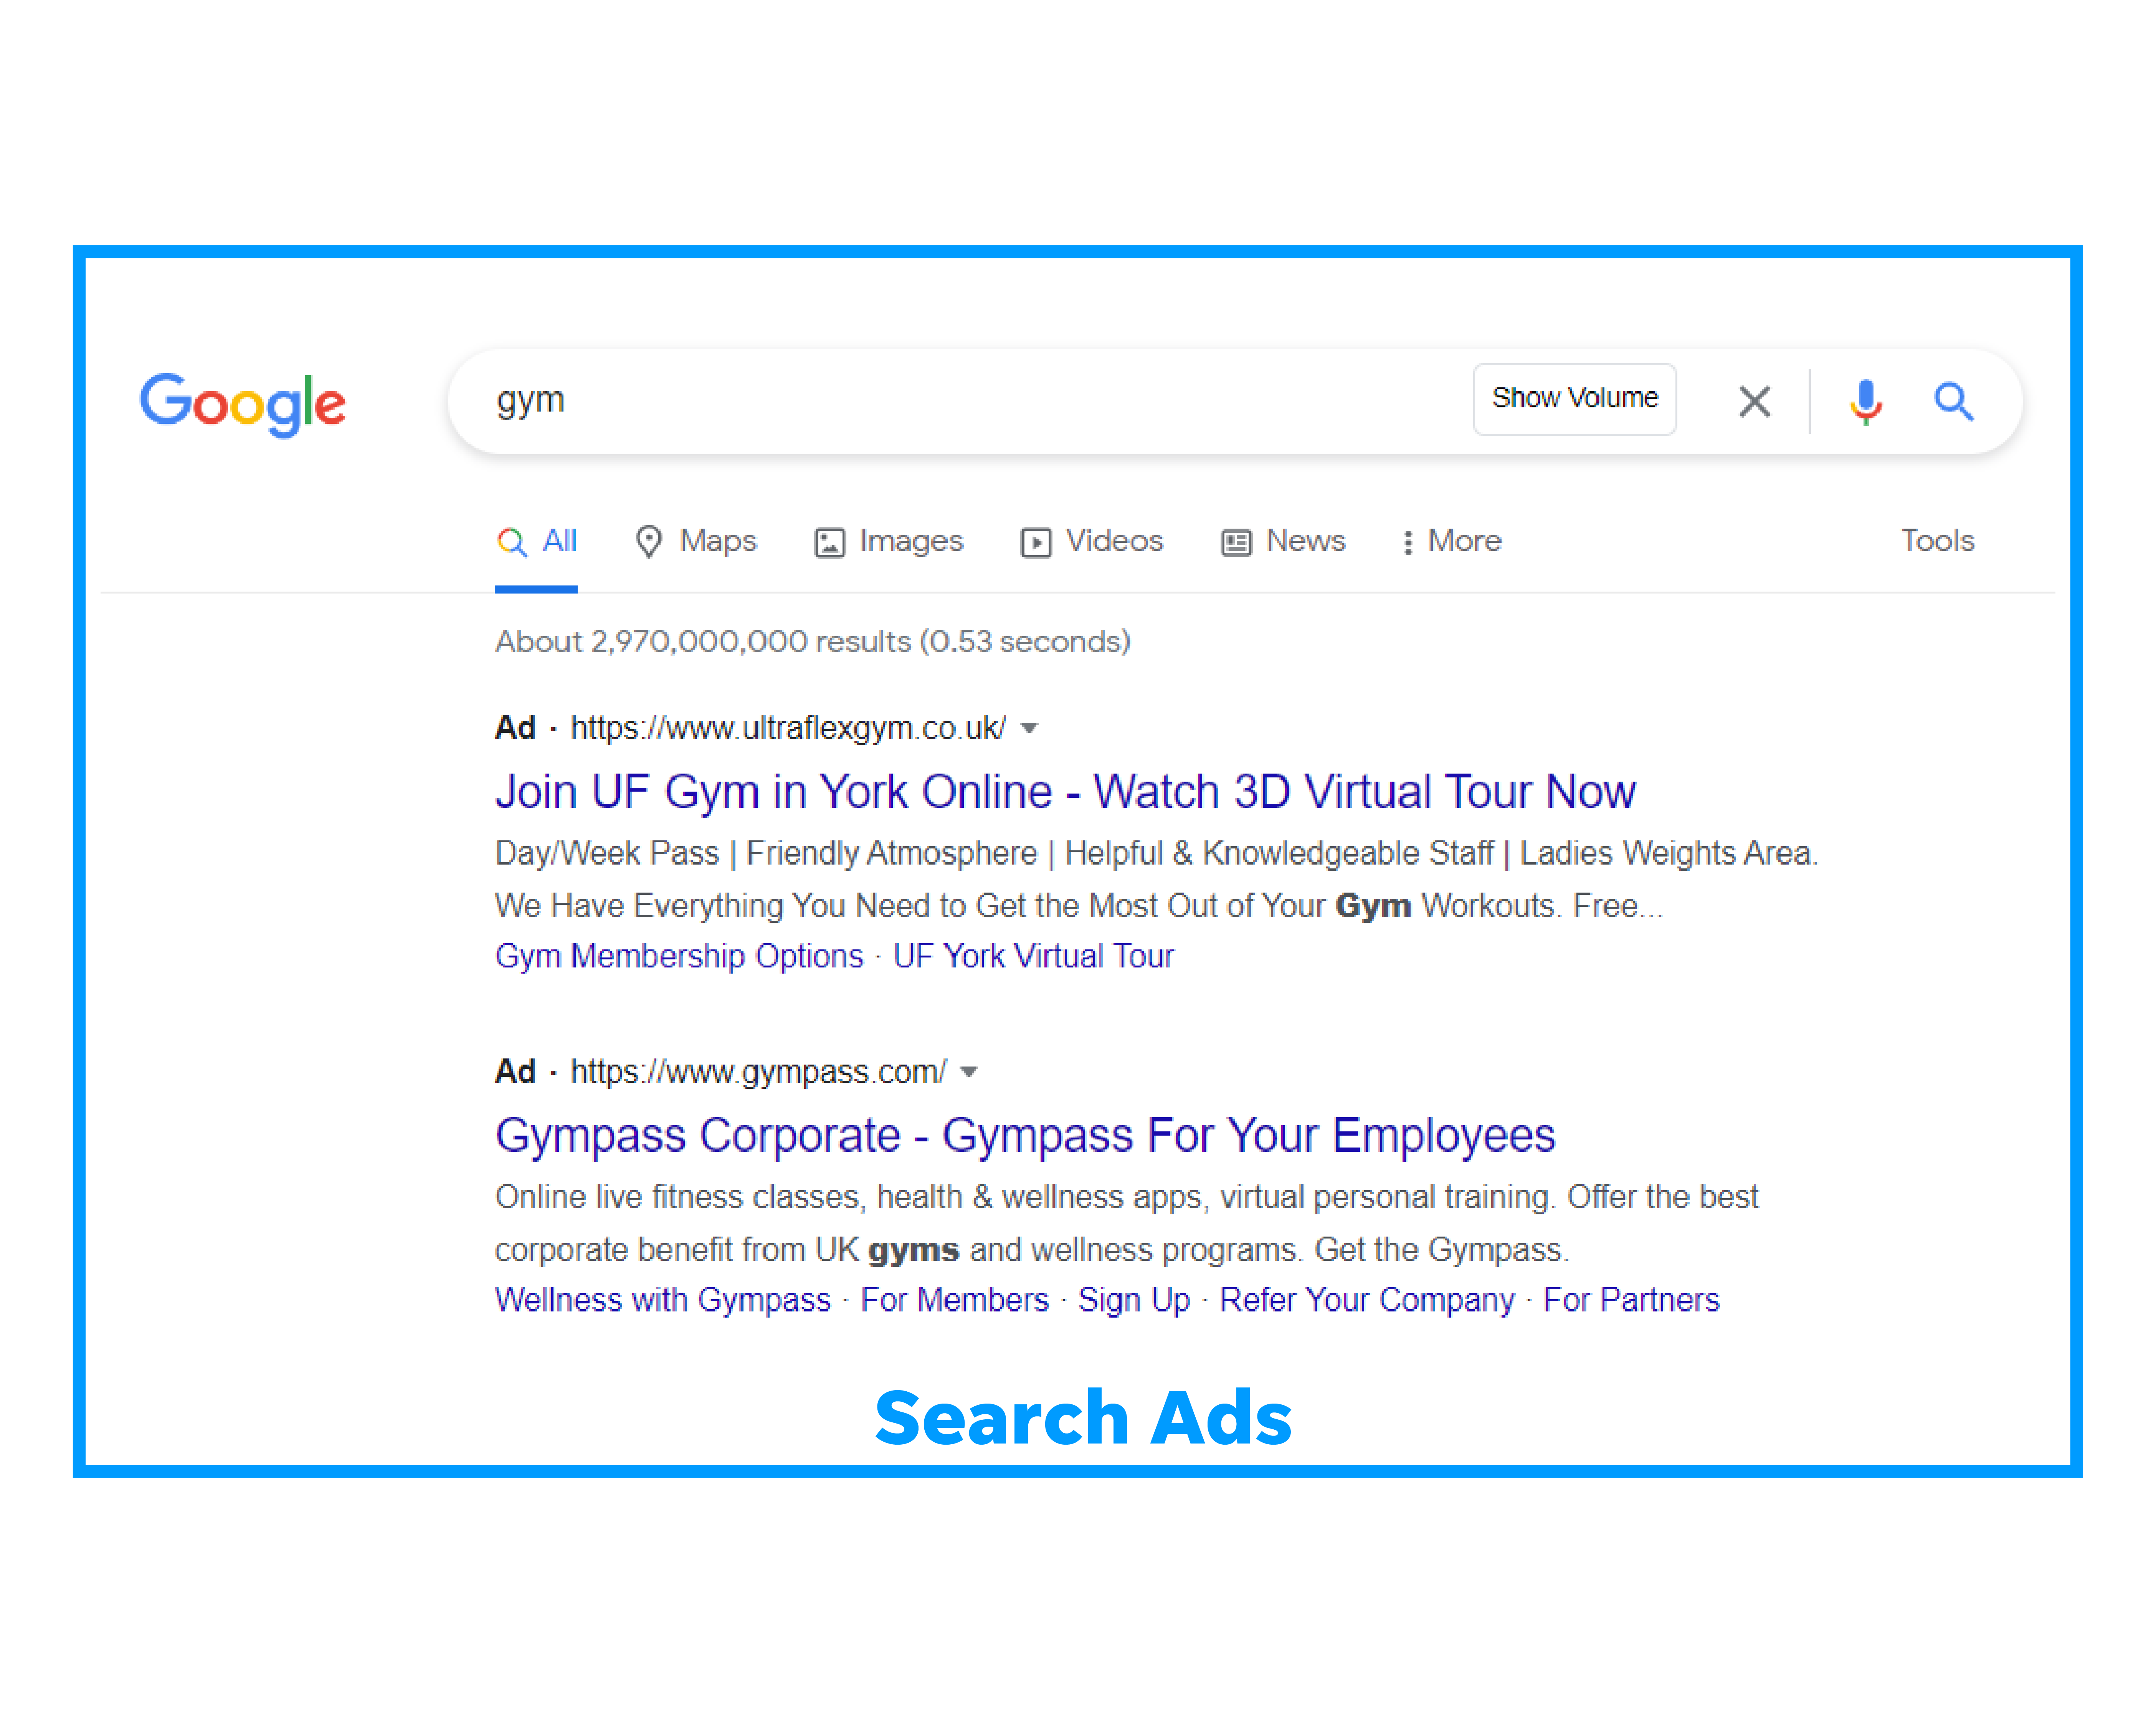 Screenshot of Googles search engine results page with gym text adverts